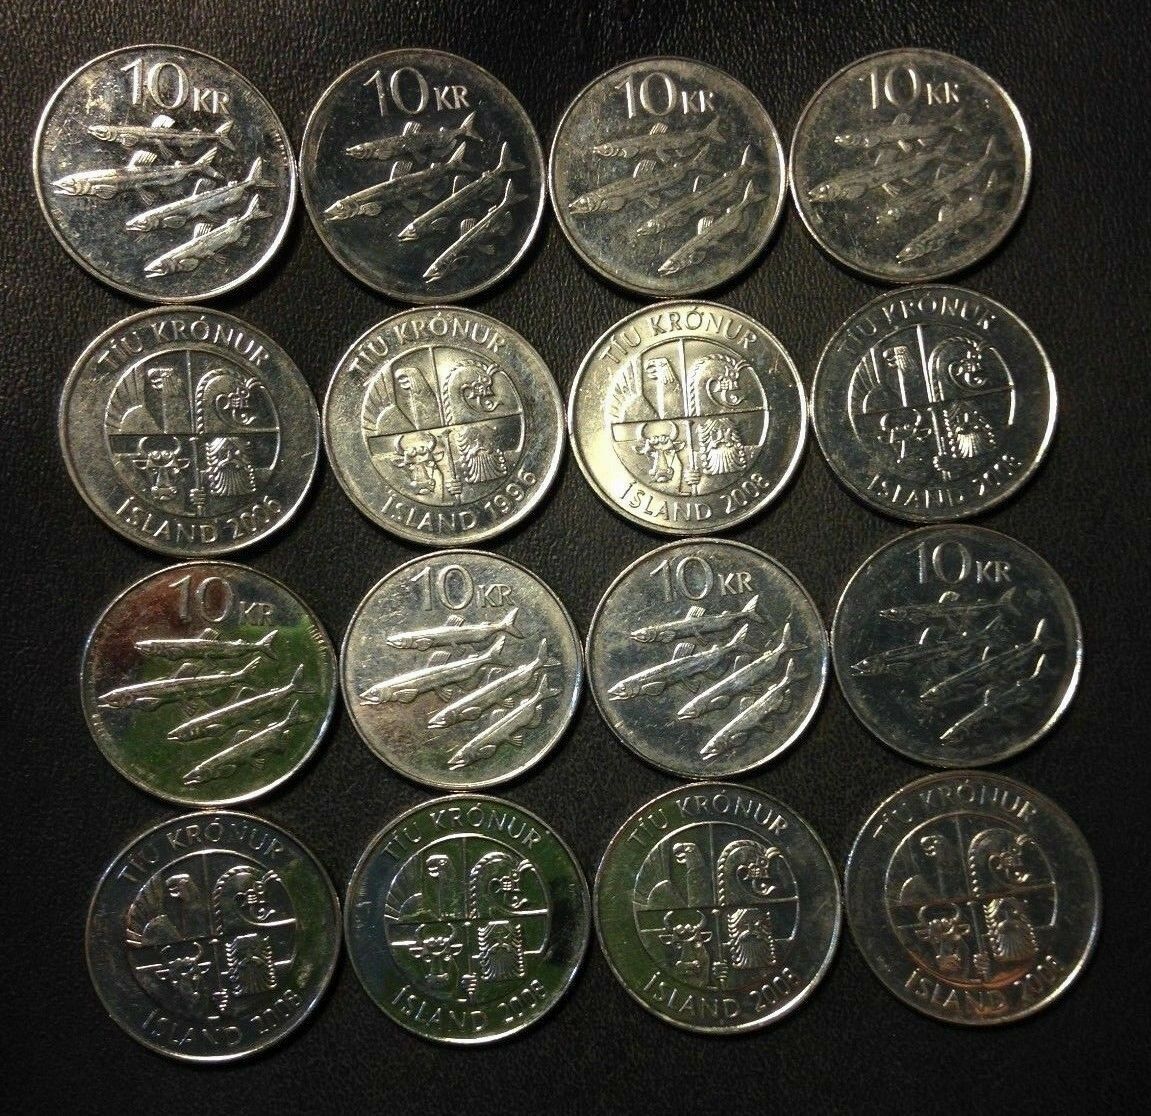 Old Iceland Coin Lot - 16 High Grade 10 Kronur Coins - Free Shipping